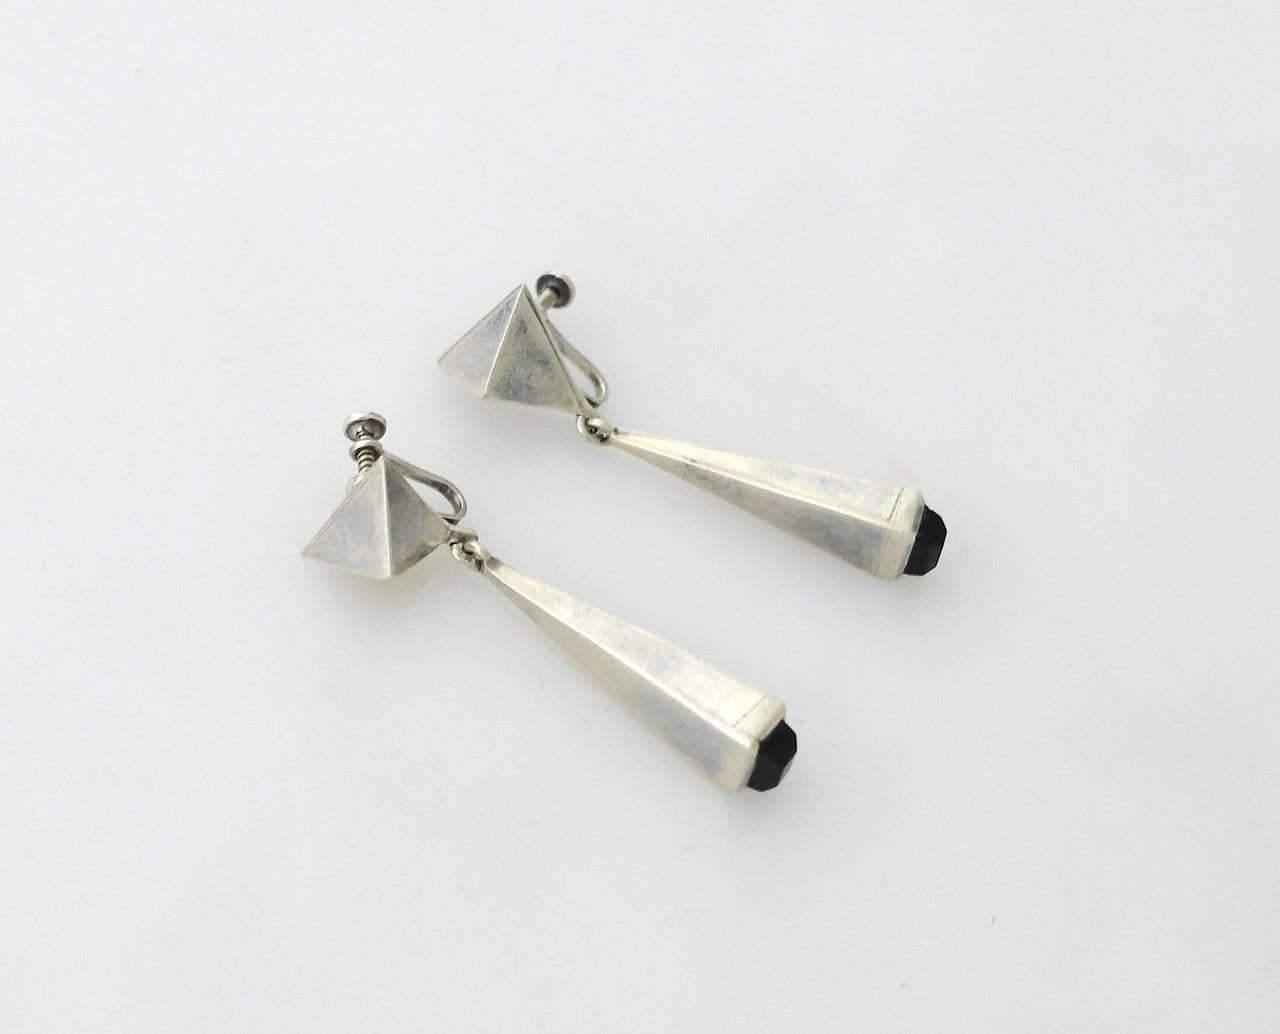 For sale is the most iconic and breathtaking matching set of jewelry from the golden Taxco period in Mexico created by the renowned silversmith Antonio Pineda (1919-2009). Given the name Matchstick because its trapezoidal design elements that